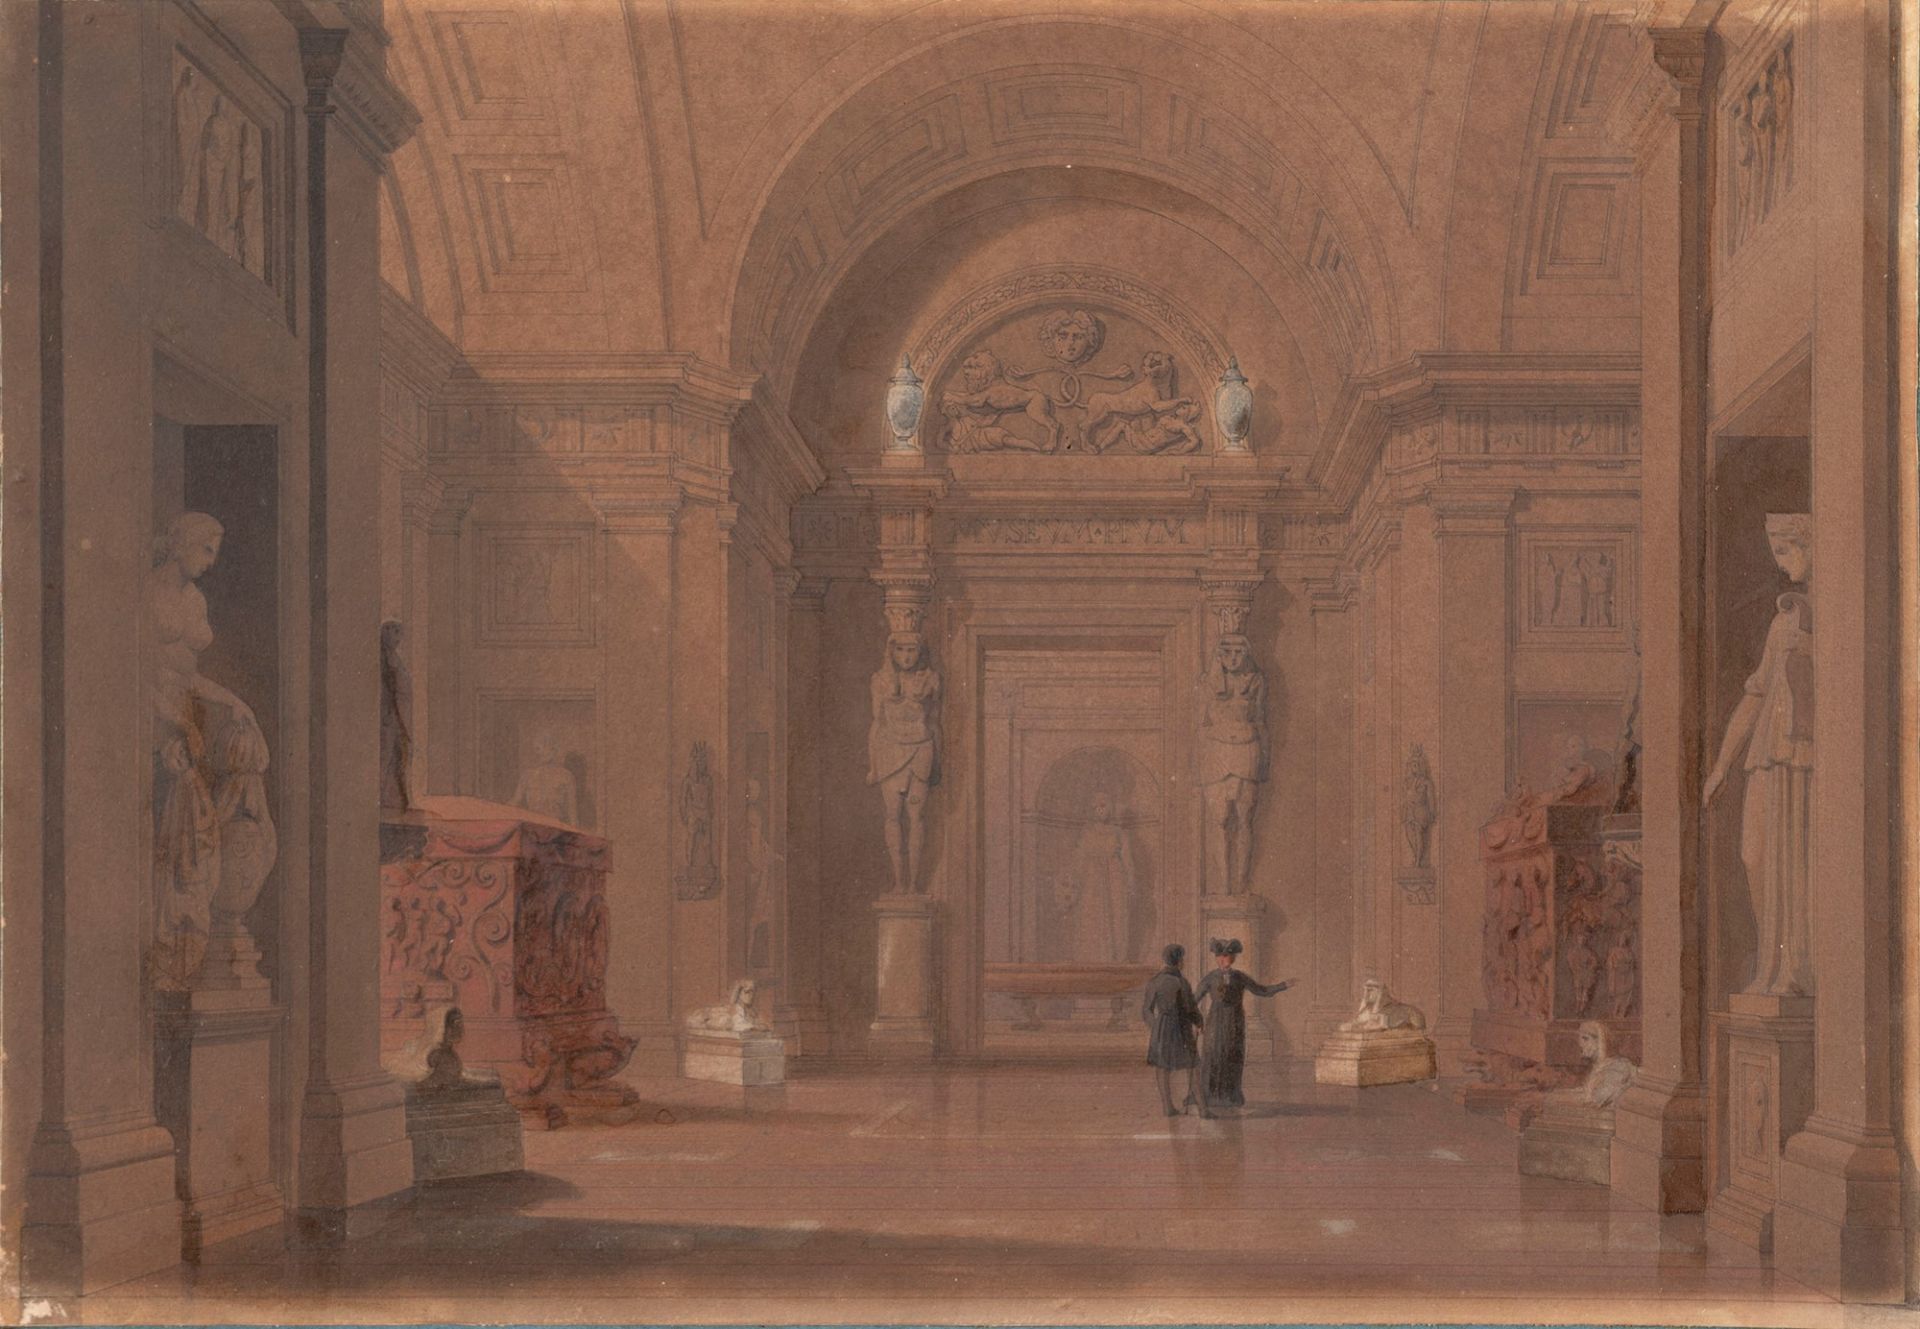 Jules-Frédéric Bouchet (Parigi 1799-1860) - Hall of the Pio Clementino Museum with the sarcophagus